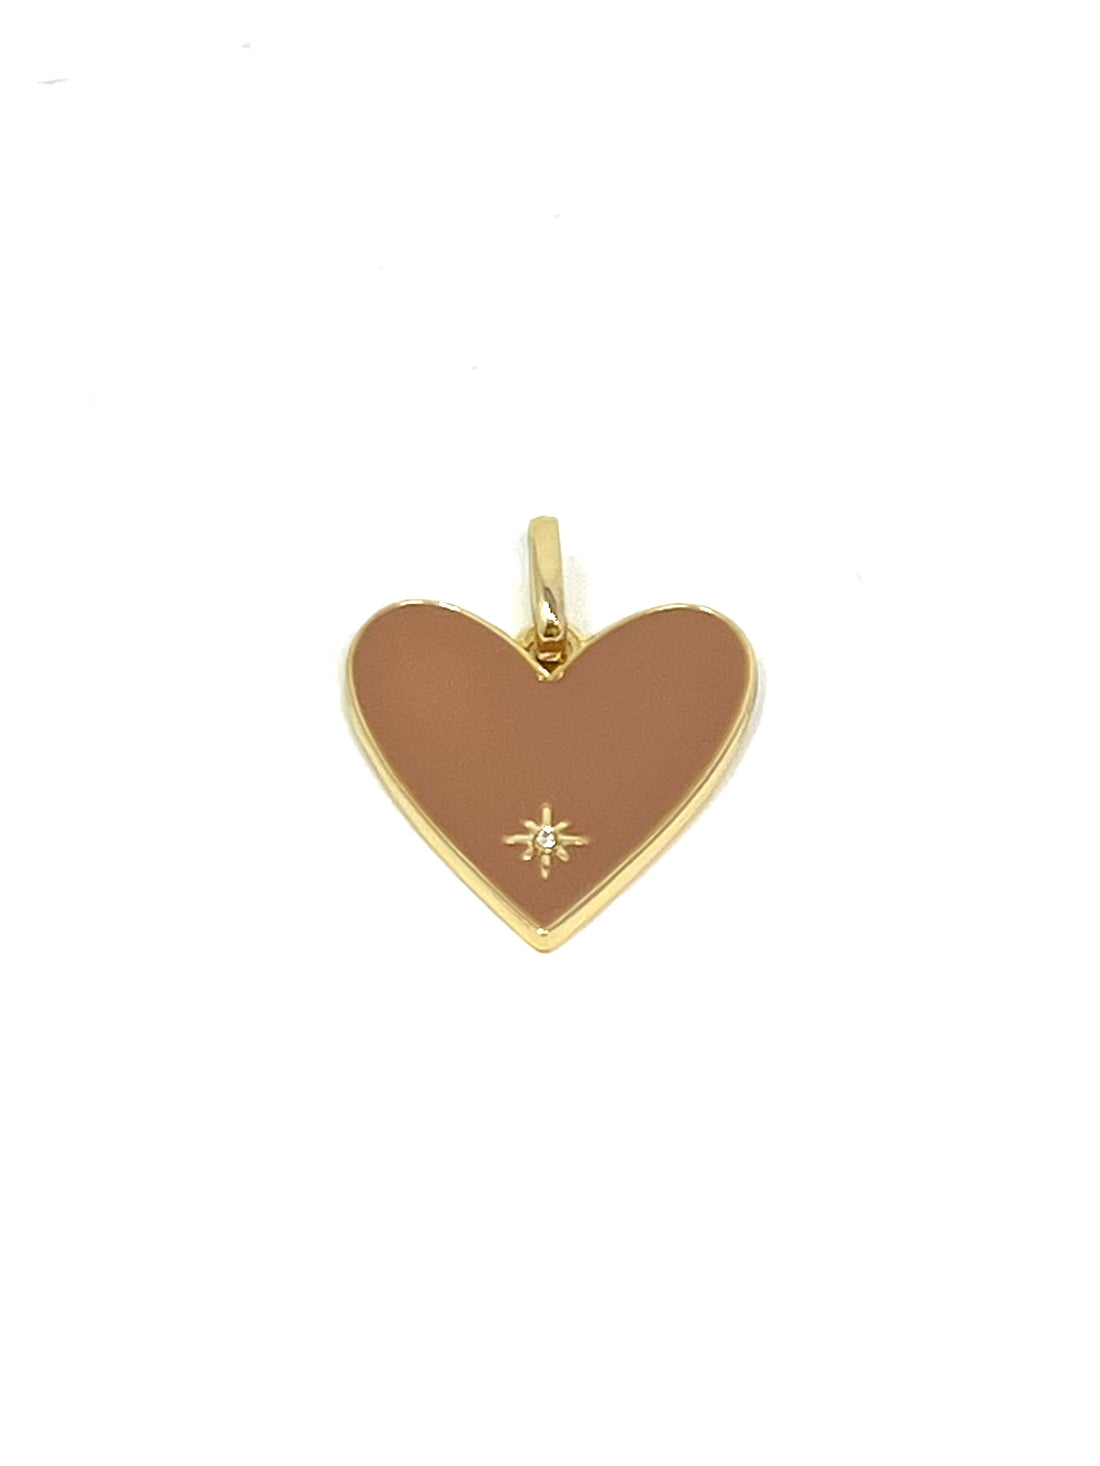 Charming Enamel Heart with Stone Charm in Nude